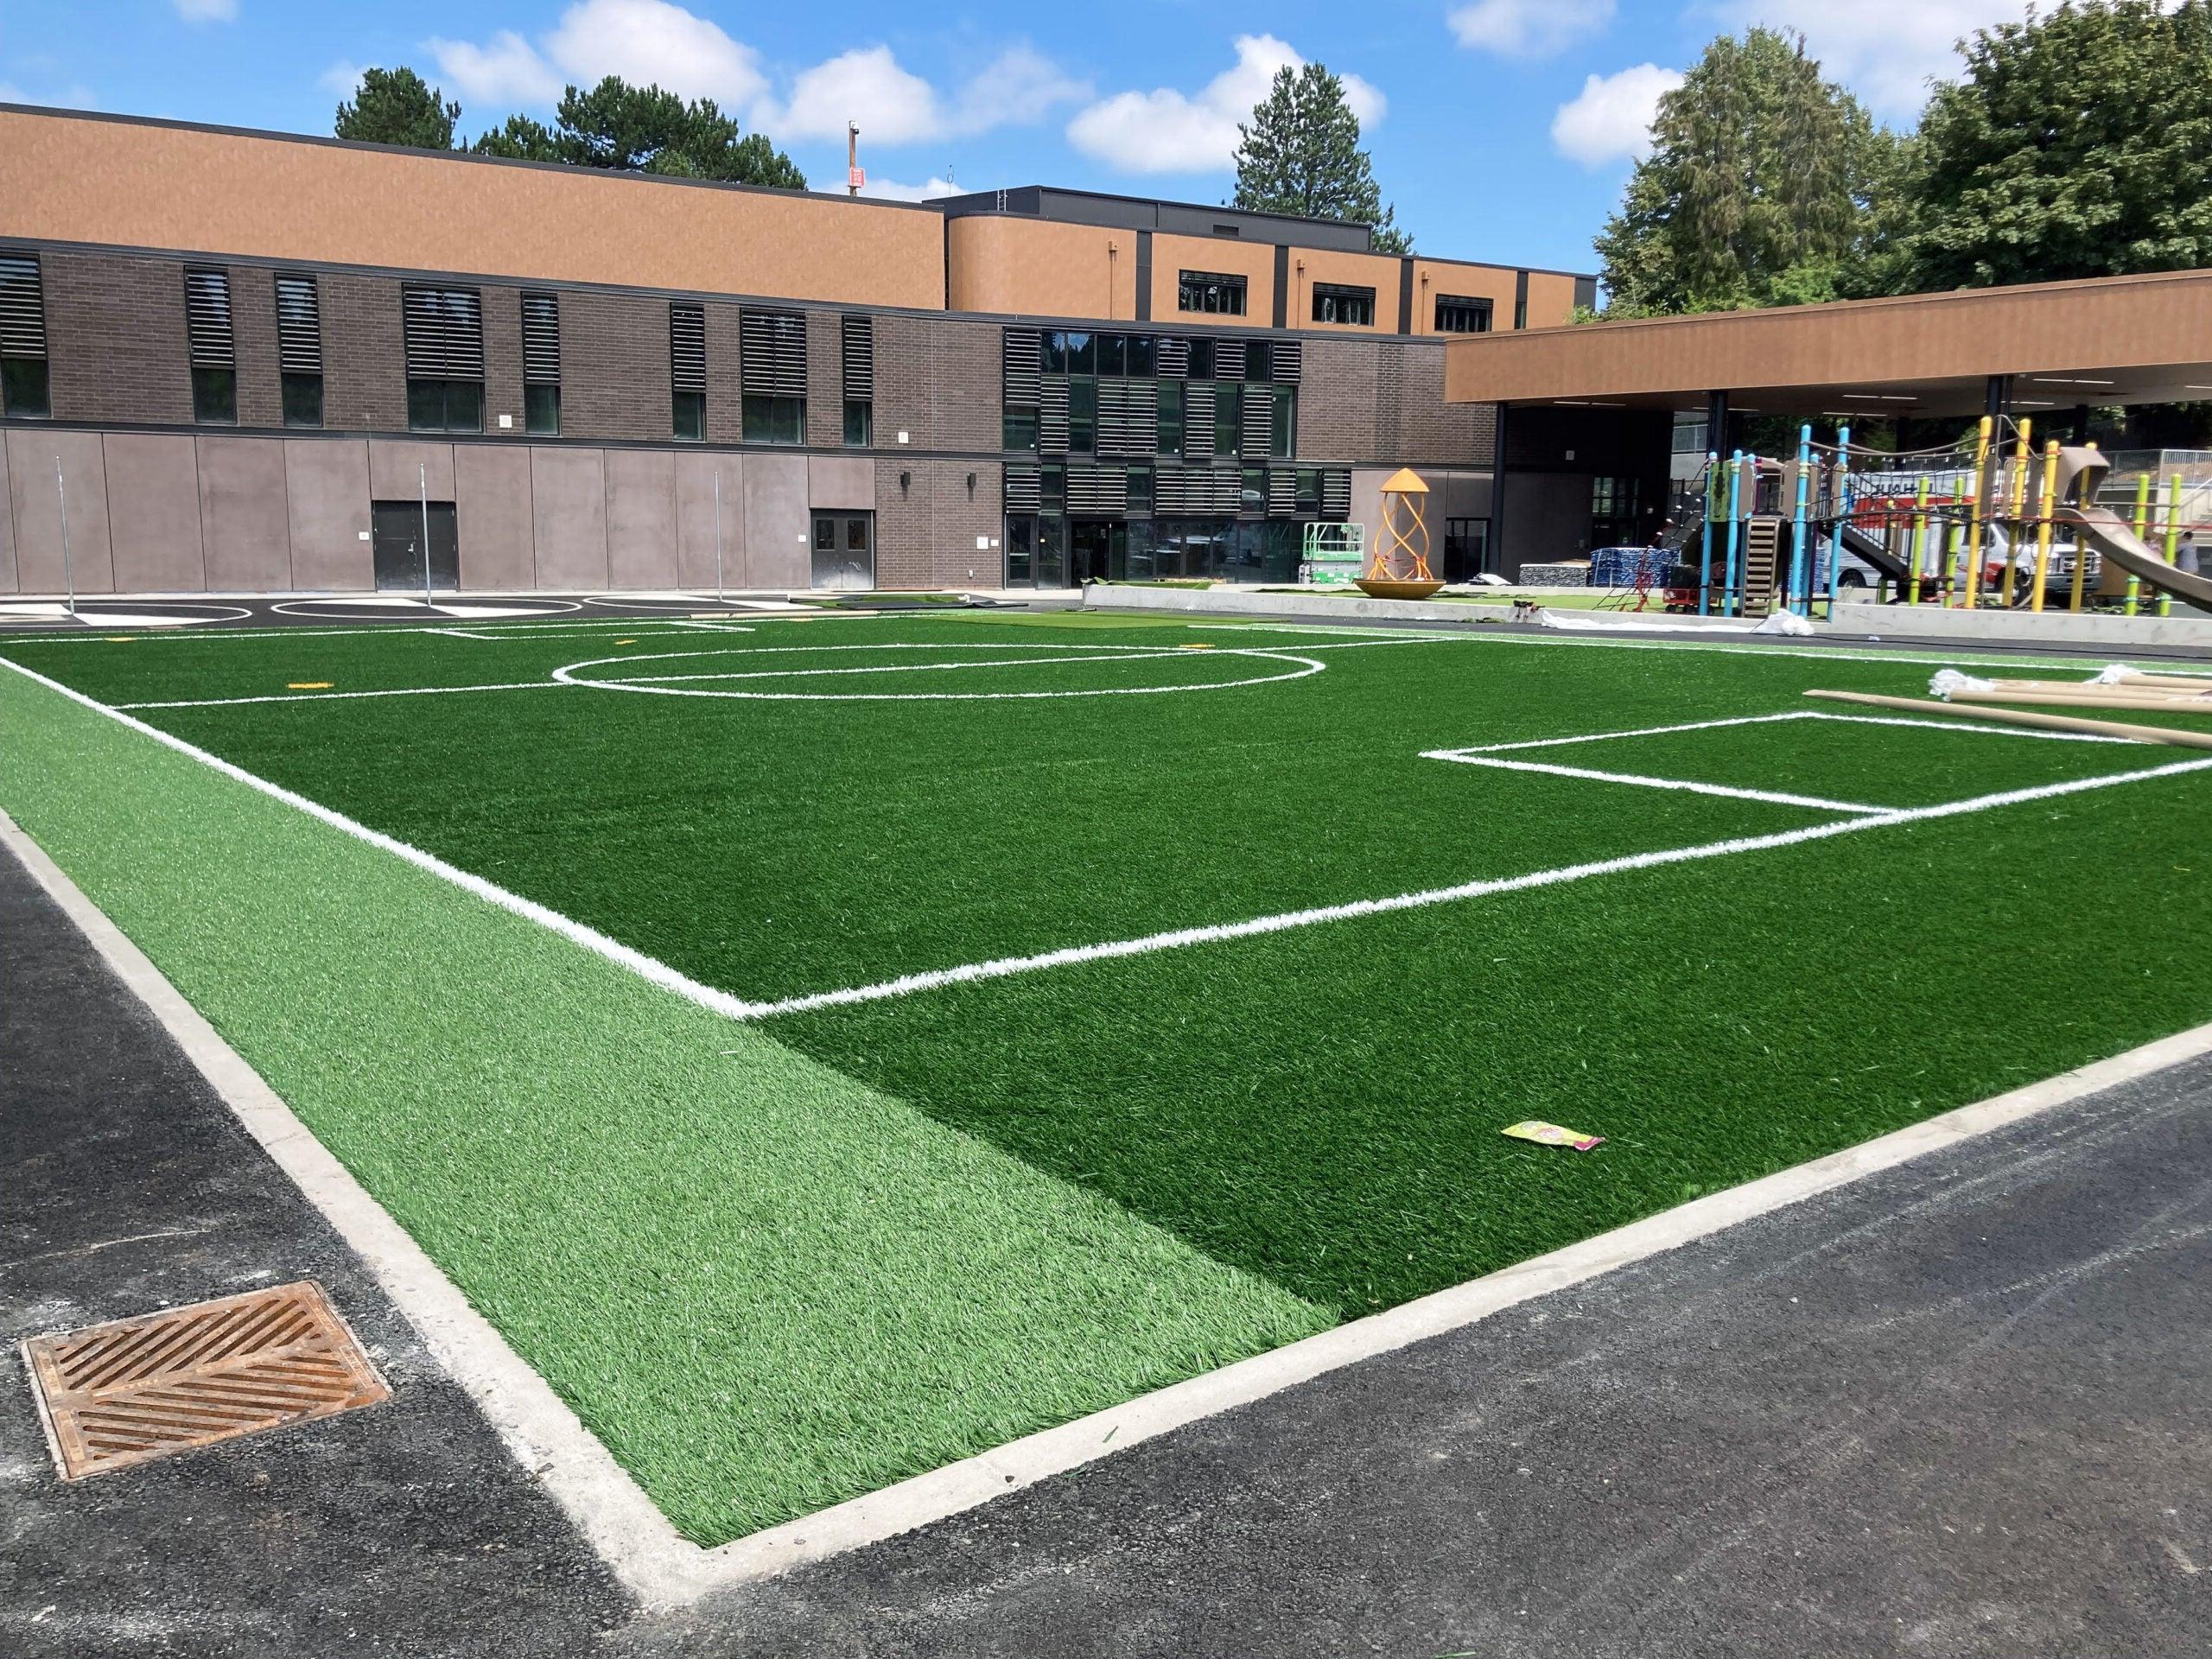 an green turf area with soccer markings is in front of a building with playground equipment behind it